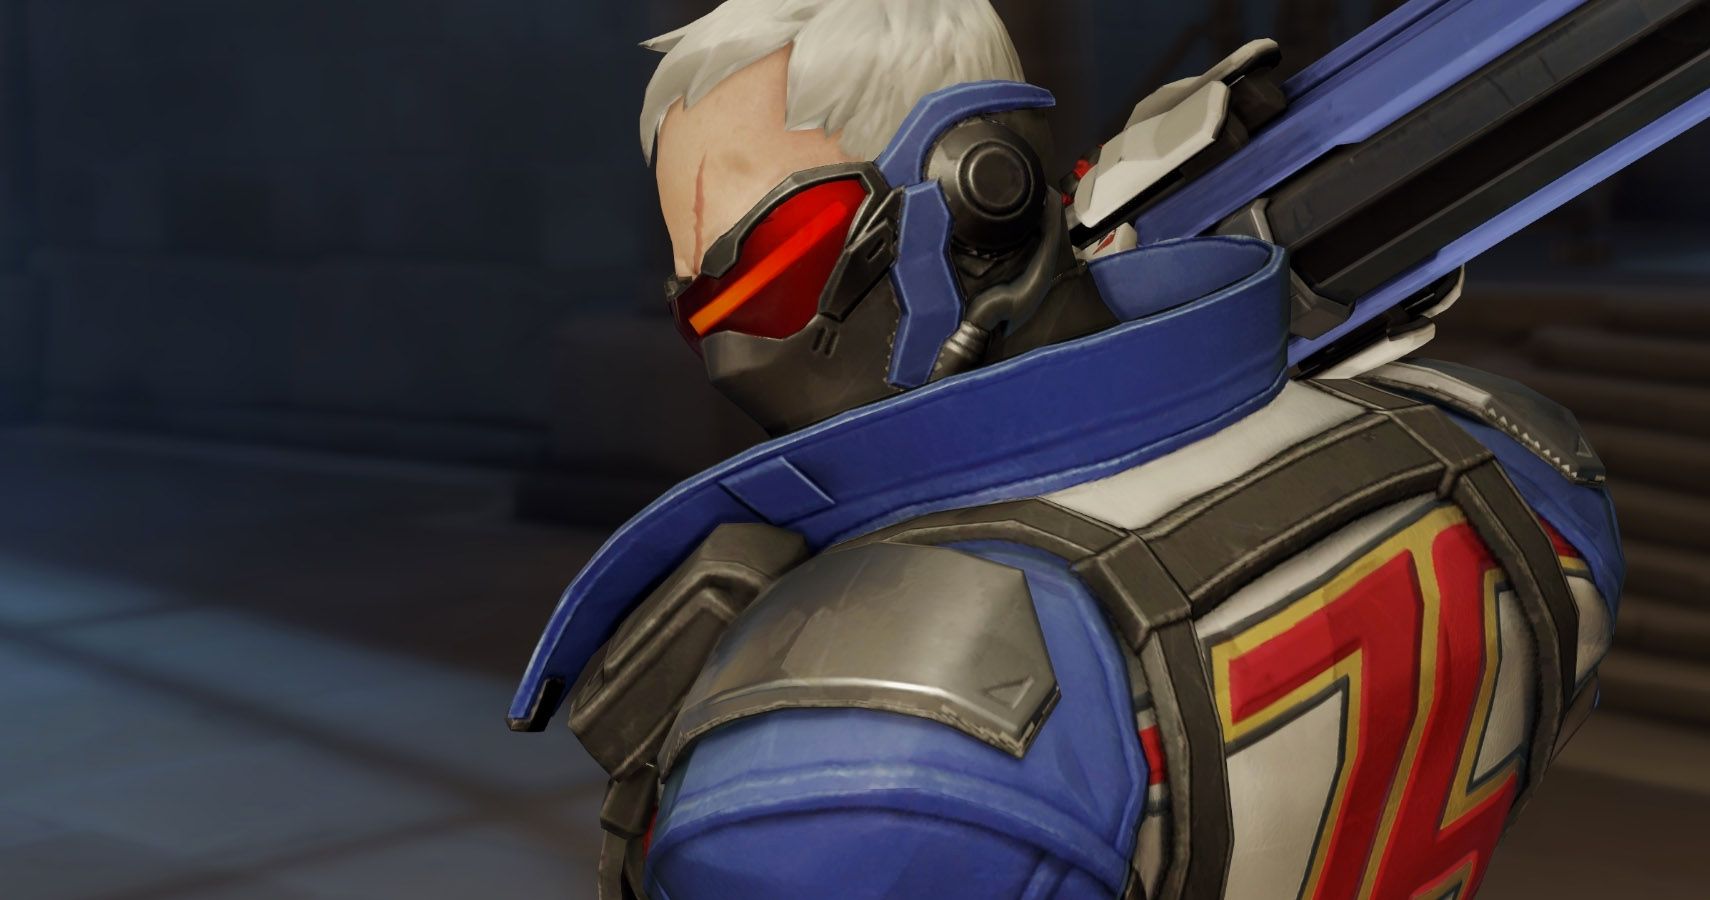 overwatch-10-things-about-soldier-76-you-didn-t-know-n-ng-tr-i-vui